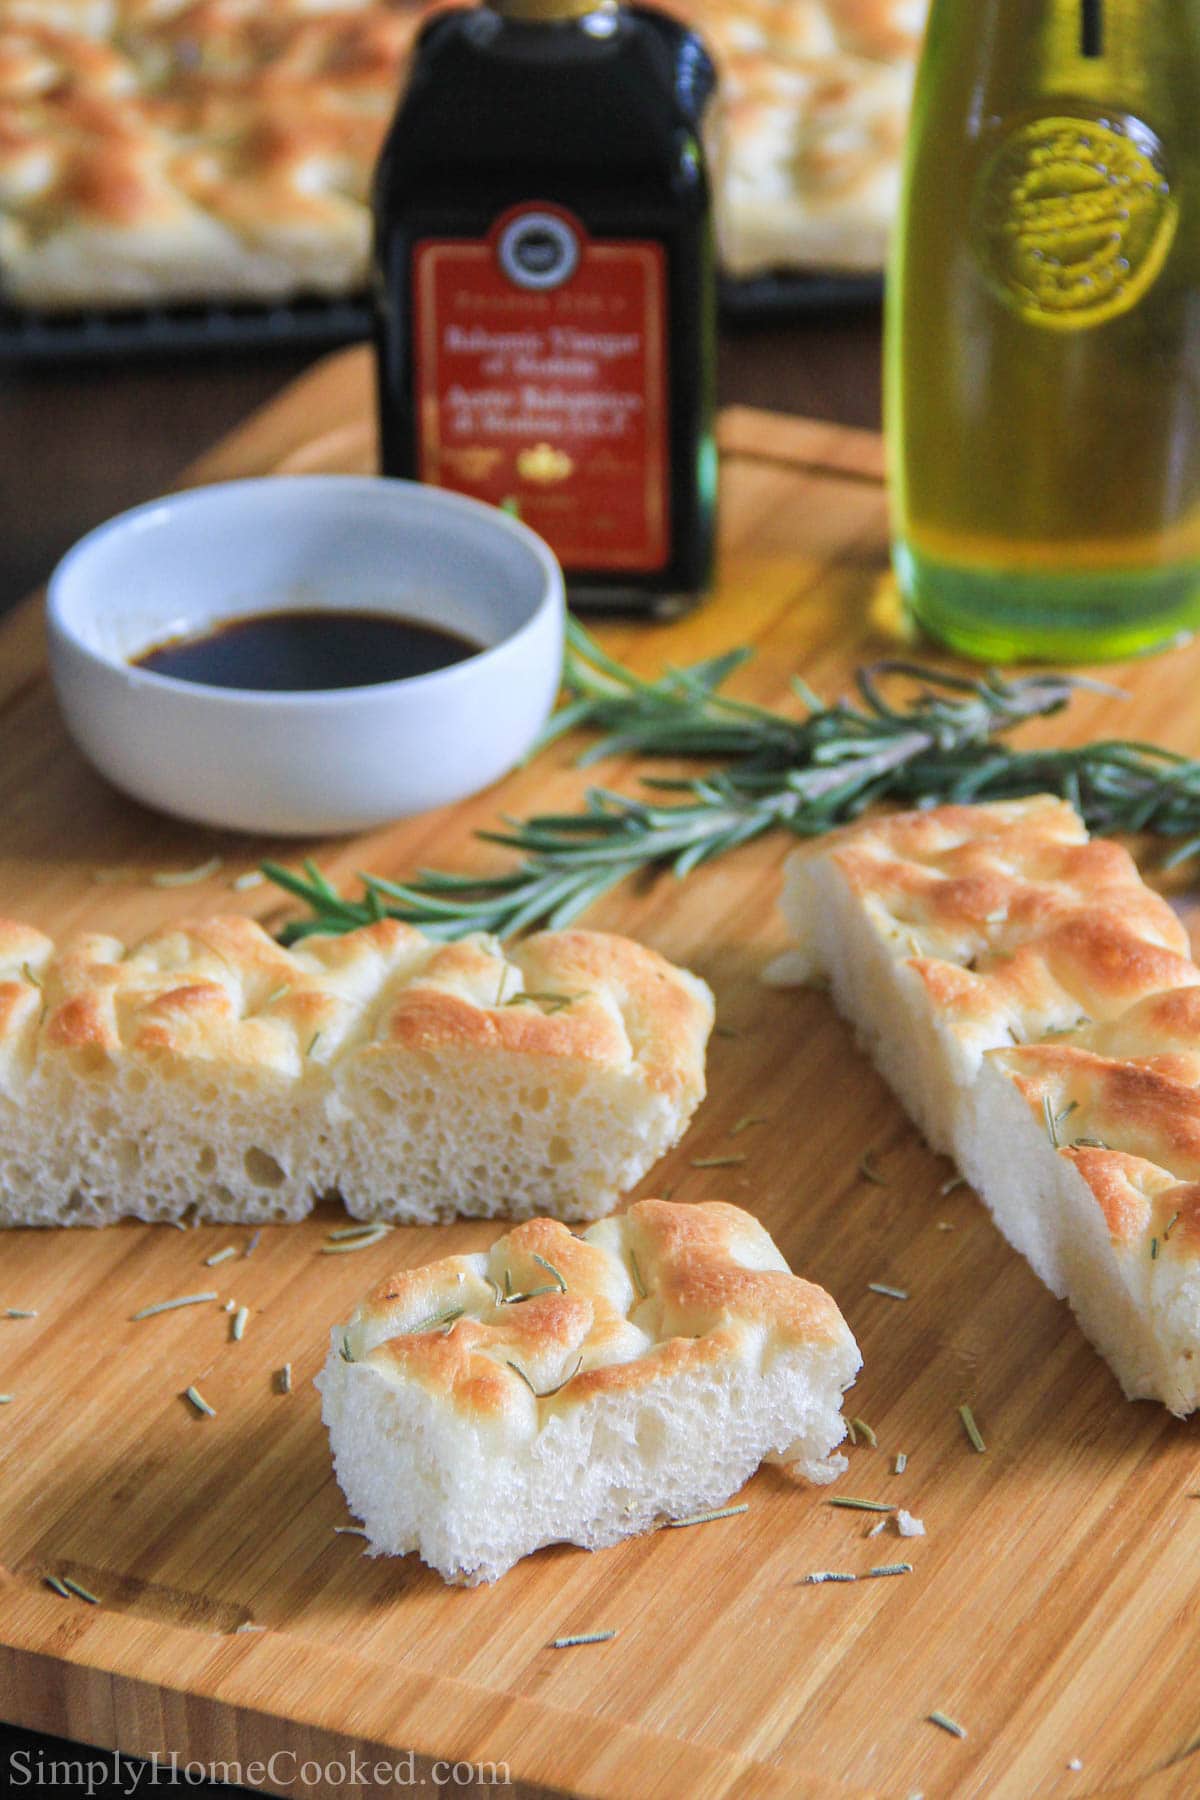 Focaccia Bread slices on a cutting board with rosemary sprigs, oil, and balsamic vinegar.